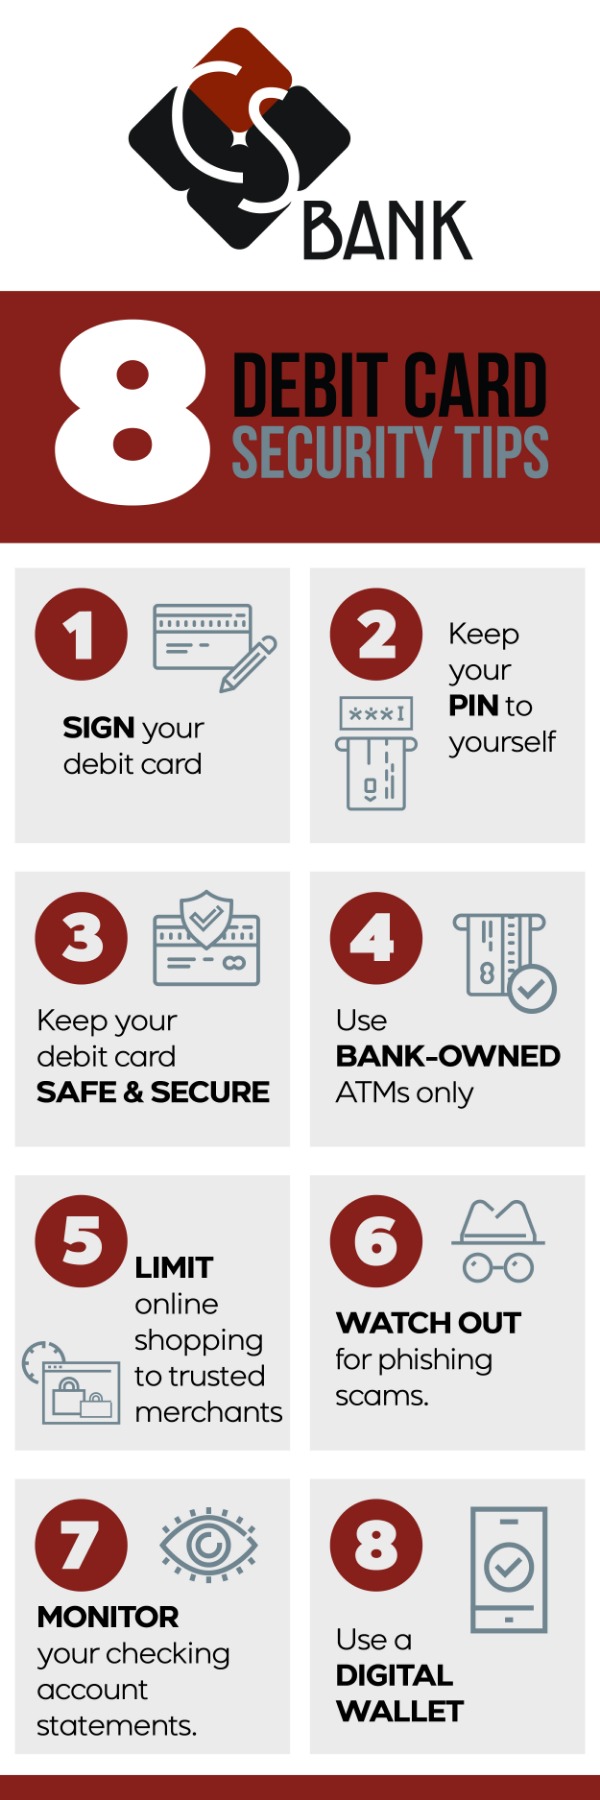 3 Ways to Keep Your Debit Card Number (PIN) Safe - wikiHow